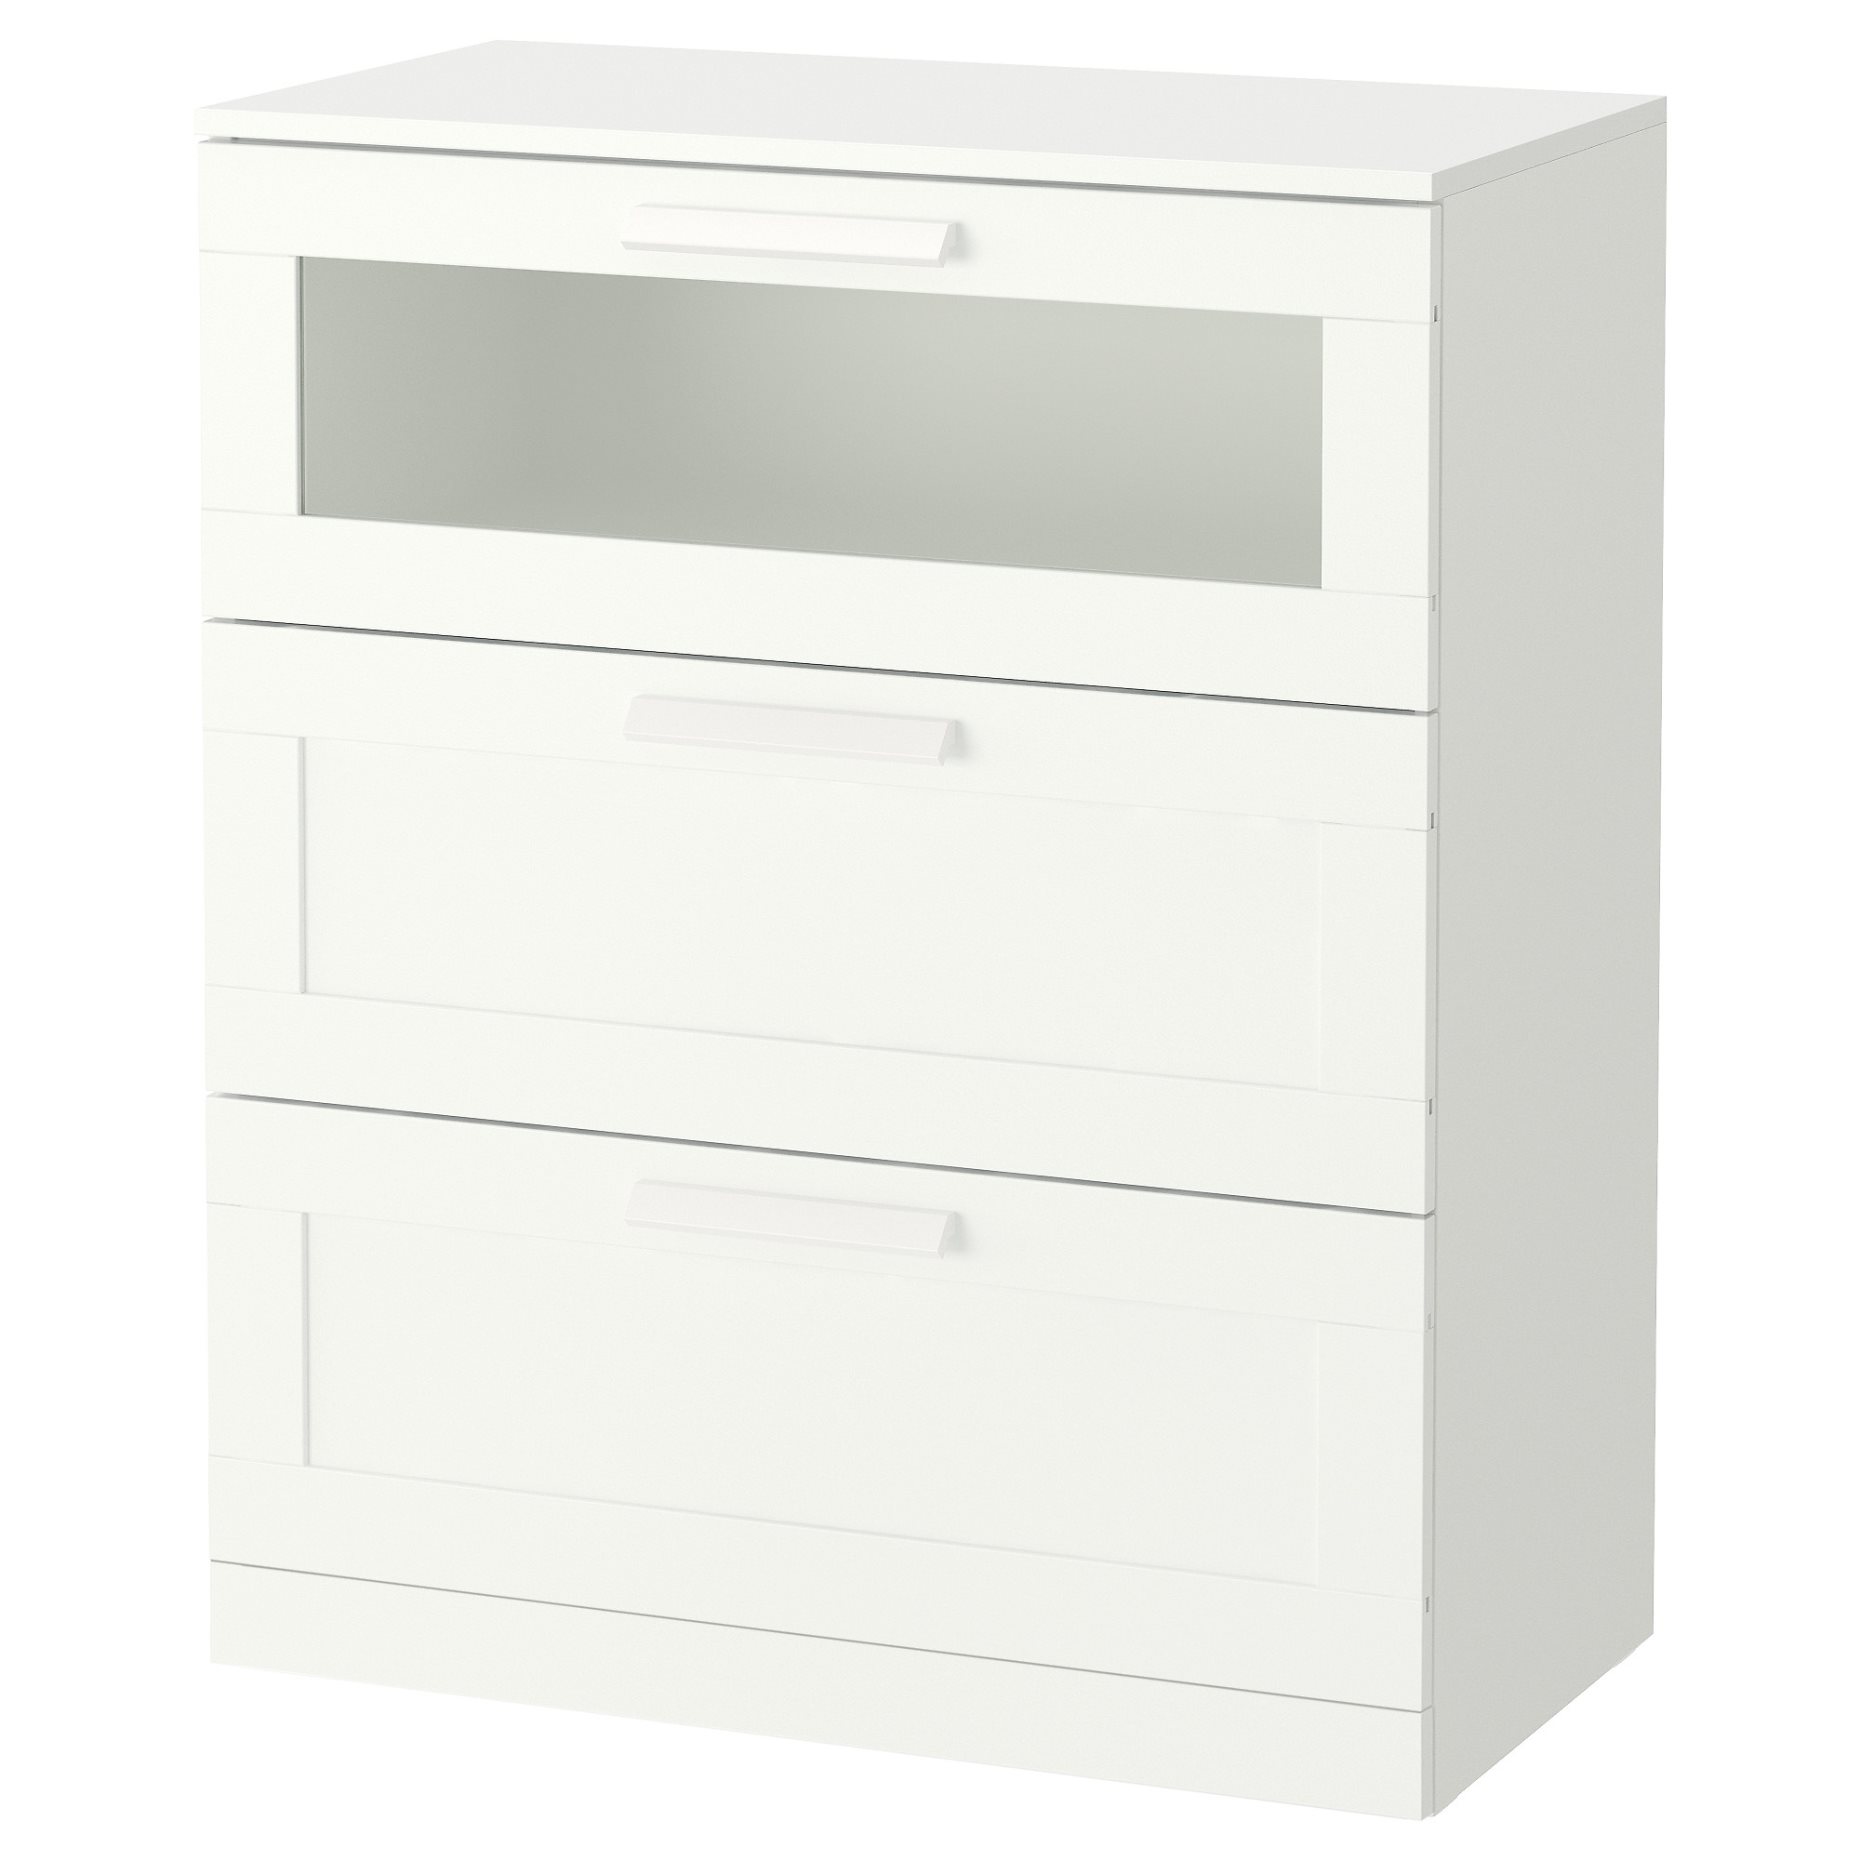 BRIMNES, chest of 3 drawers, 003.920.41